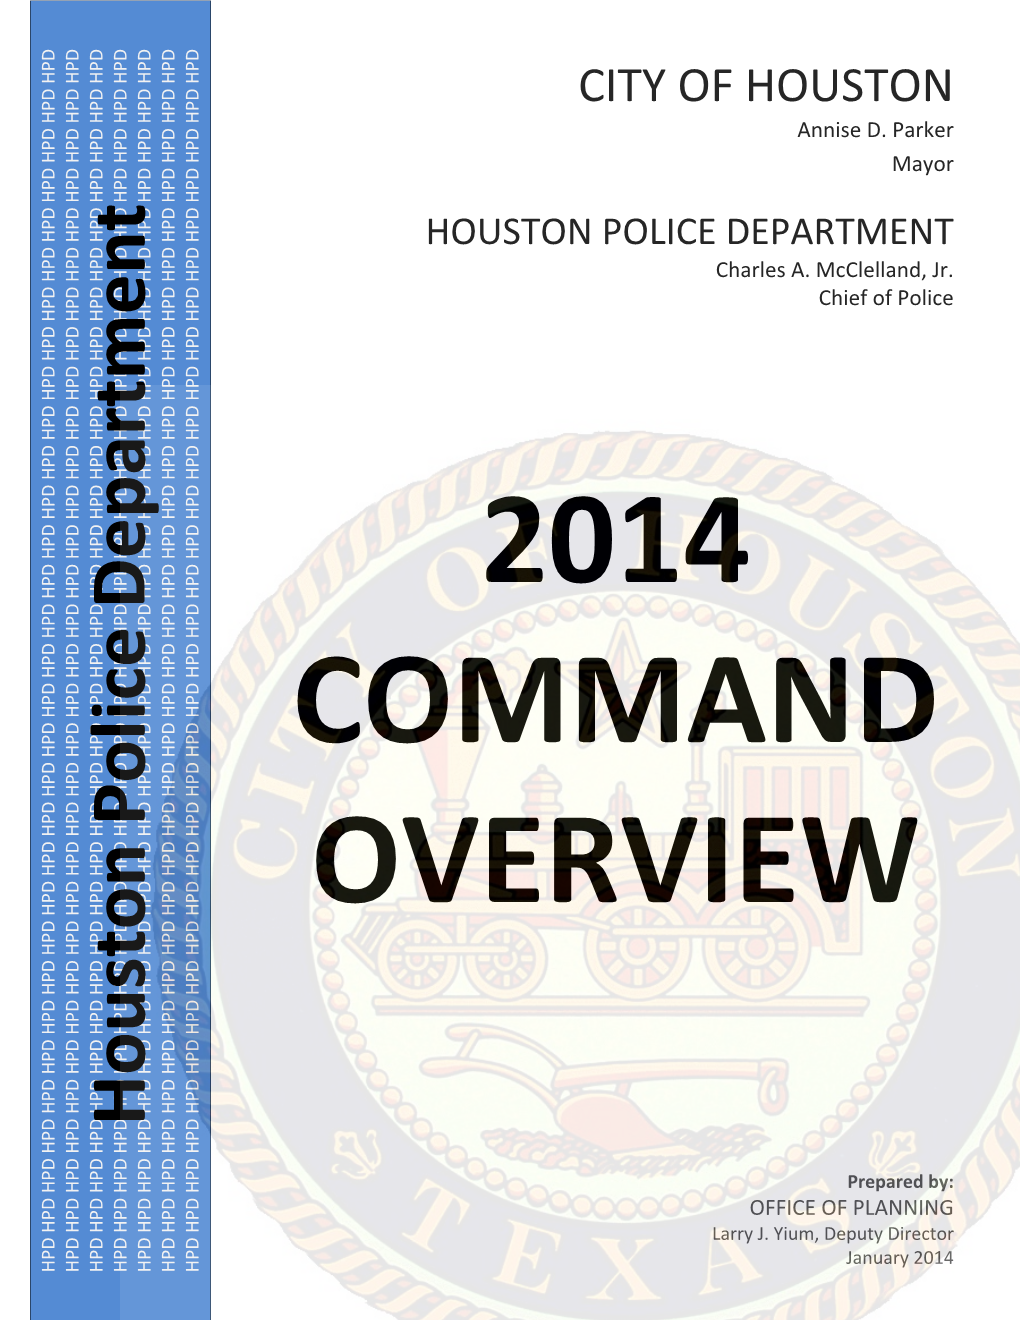 HOUSTON POLICE DEPARTMENT Charles A